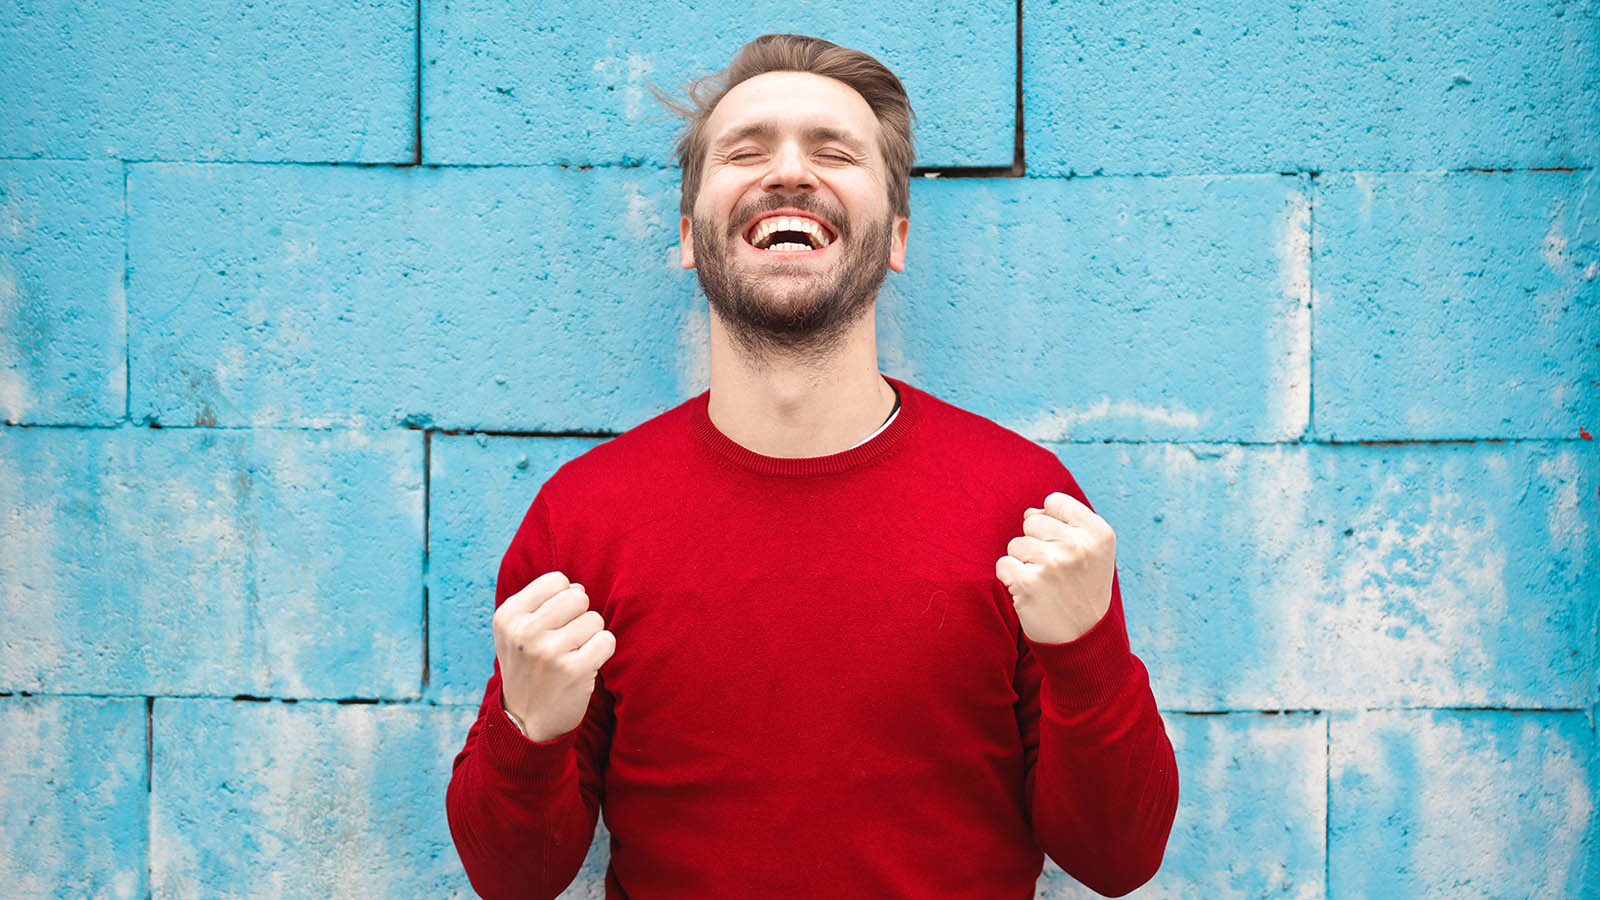 a man in red shirt standing in front of blue wall, expressing happiness